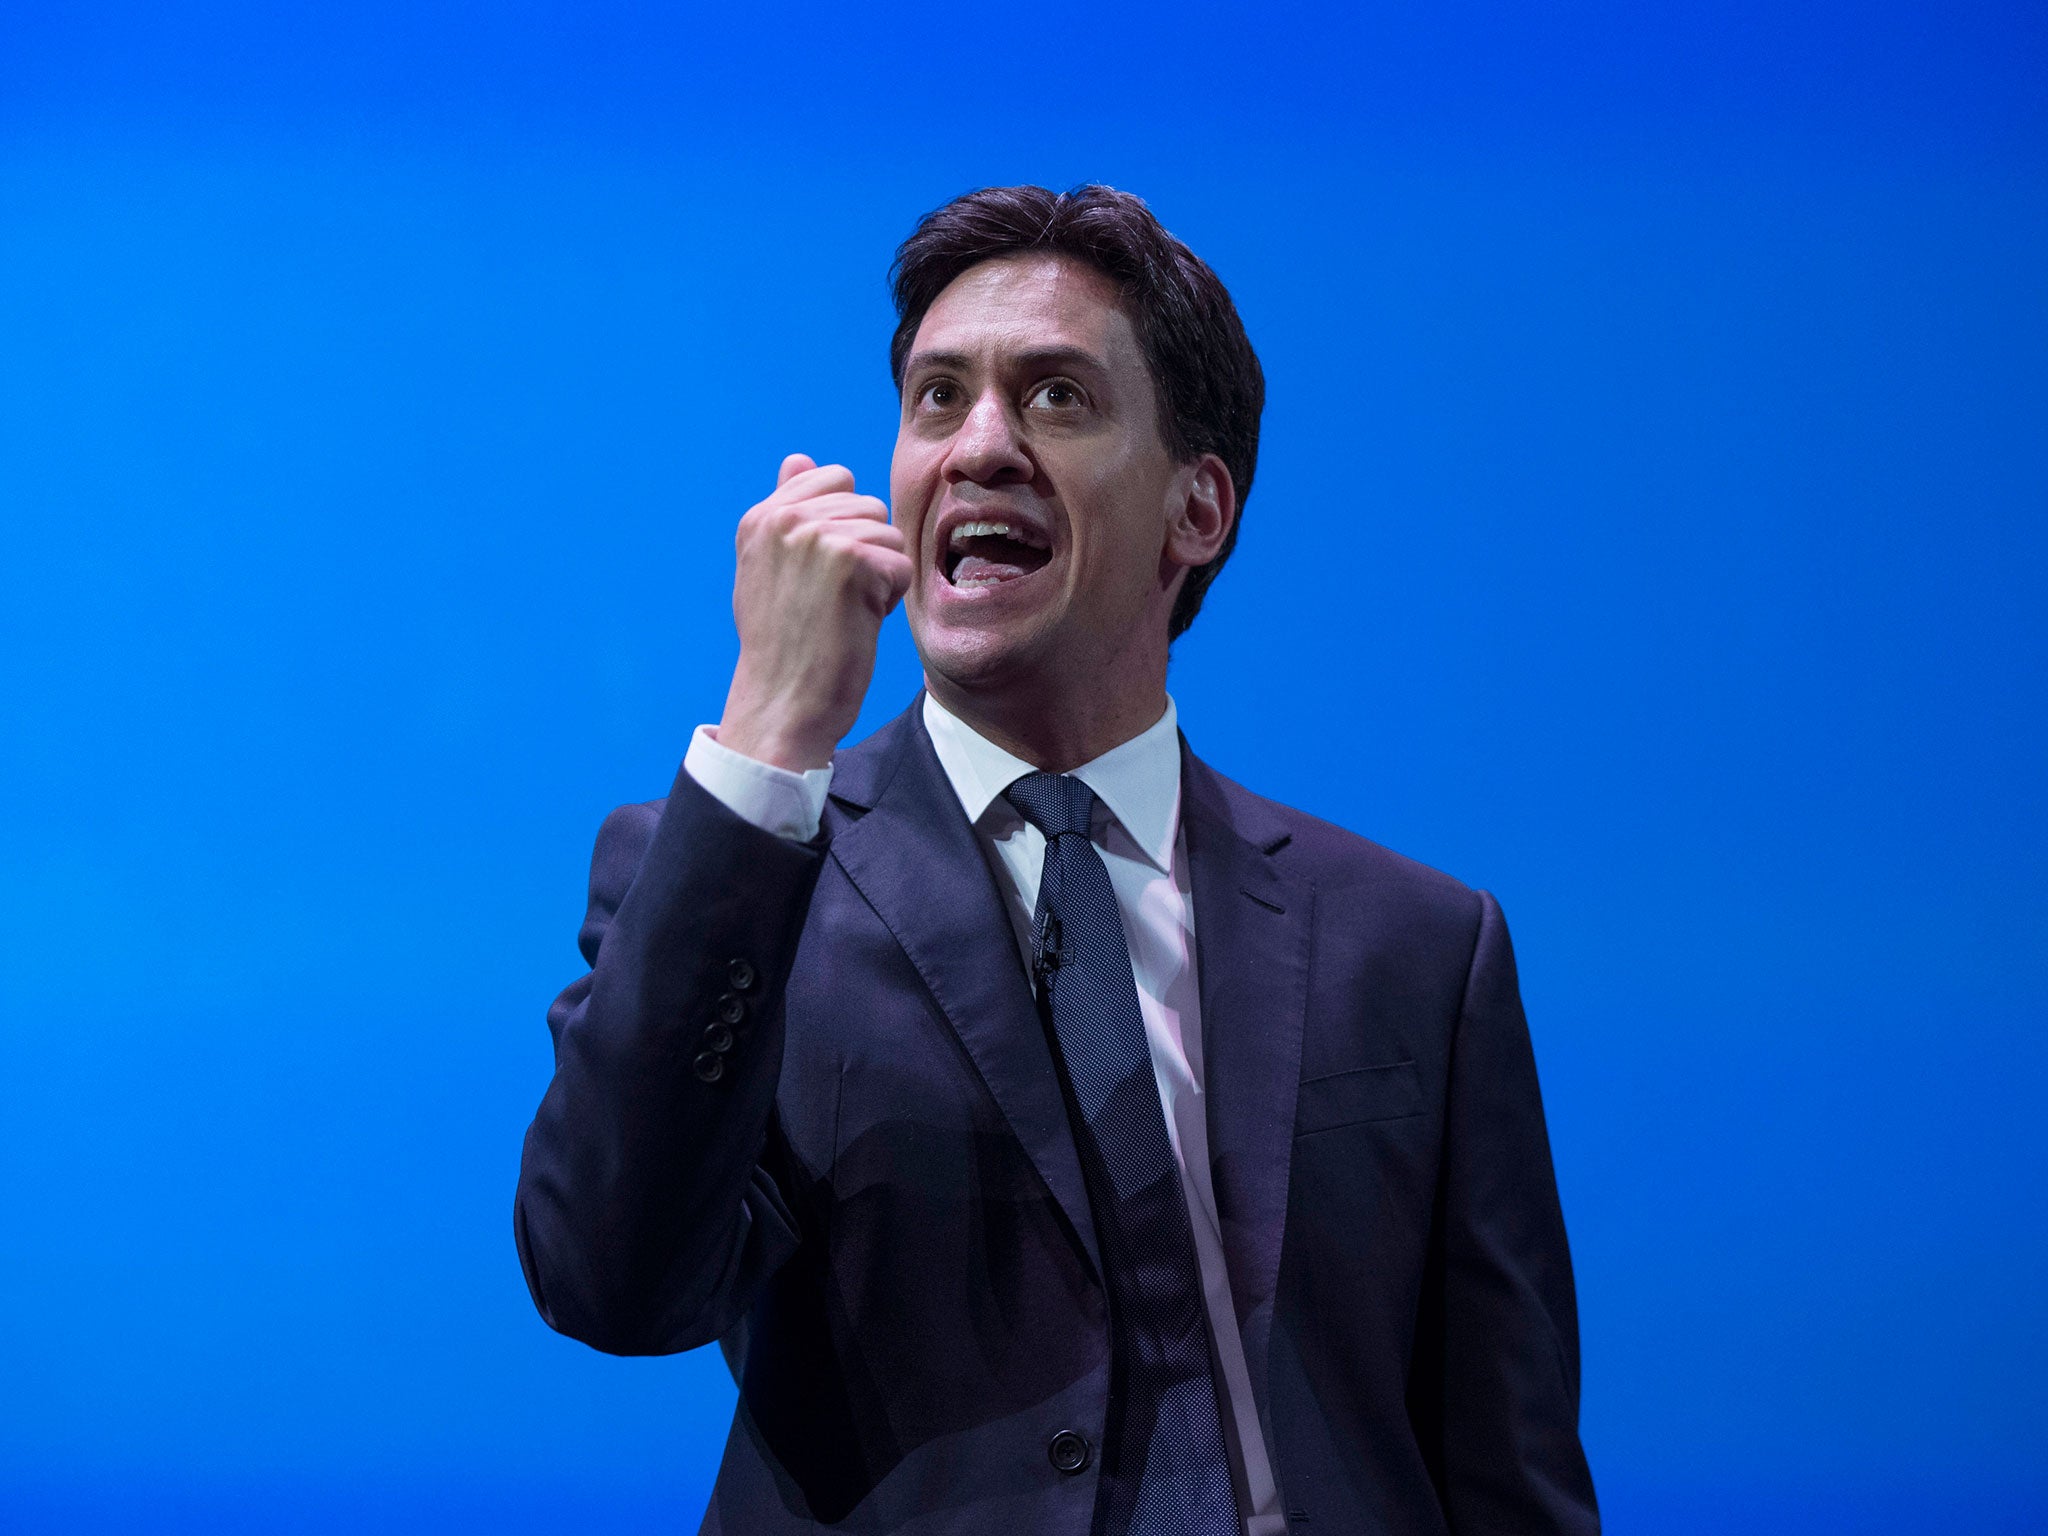 Ed Miliband, the Leader of the Labour Party, delivers a speech at the 'Policy Network Conference' held in the Science Museum on July 3, 2014